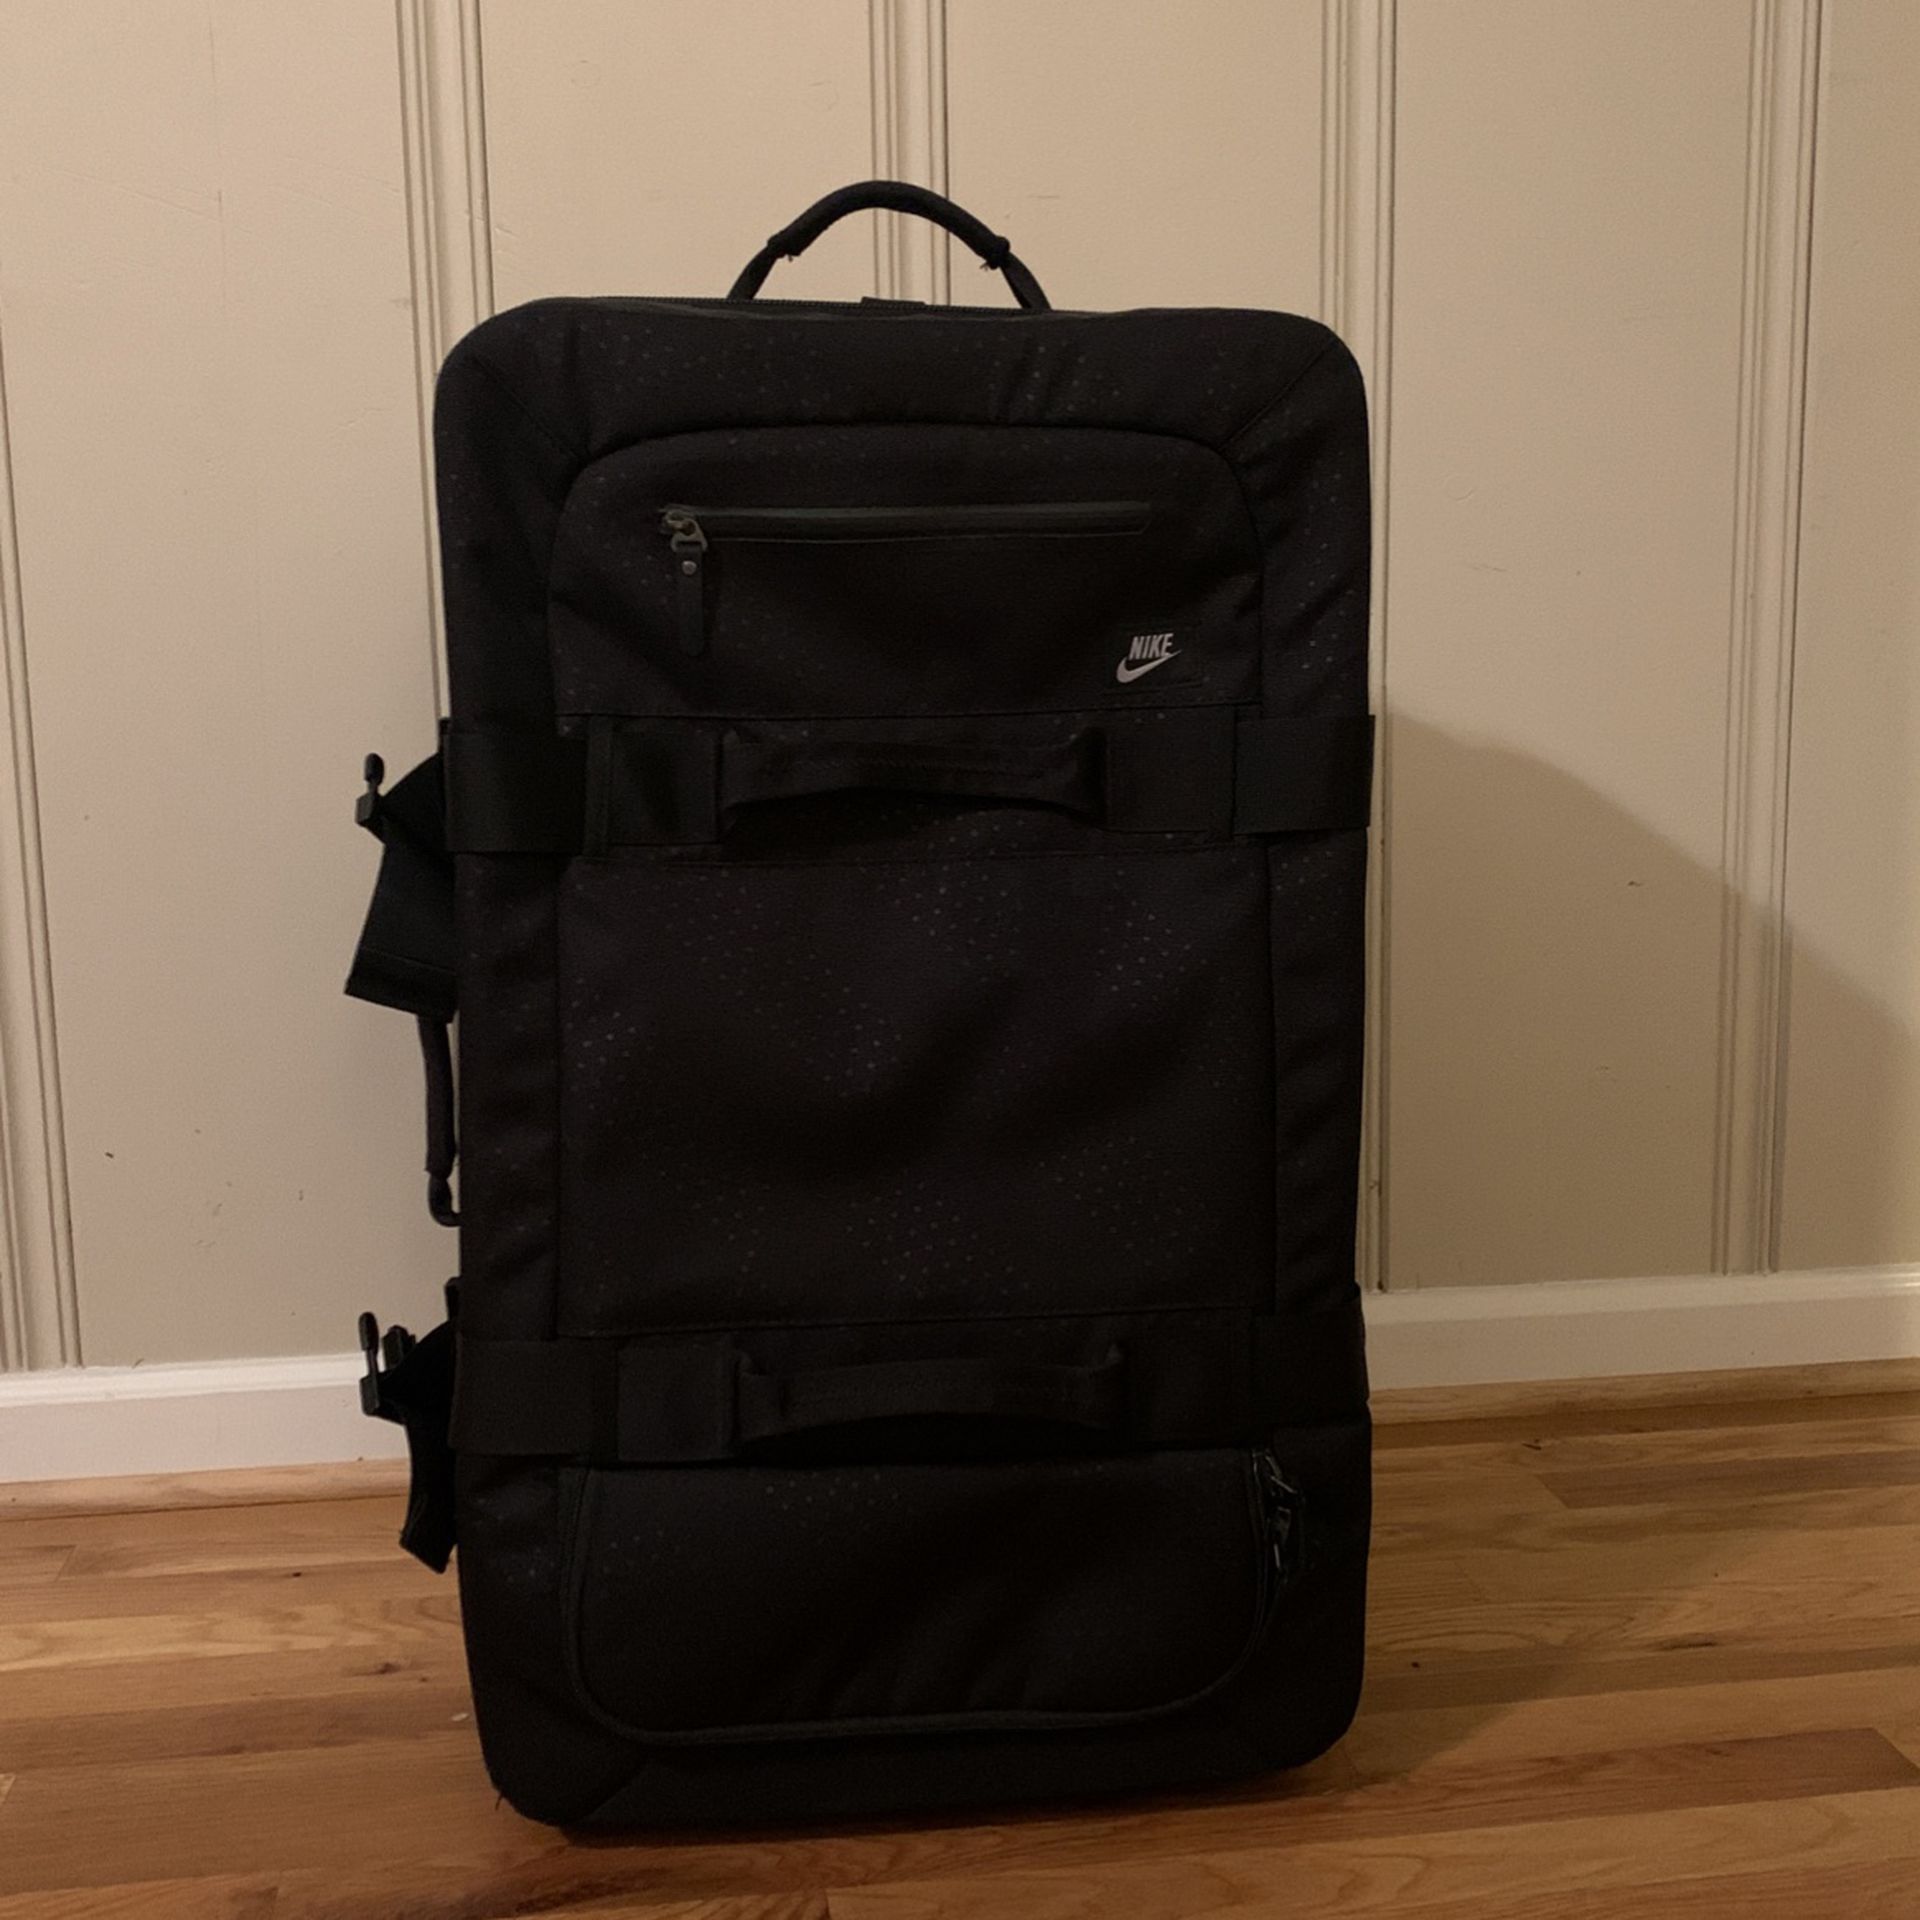 Nike 49 Custom Luggage Large Travel Rolling Suitcase Black for Sale in Northport, AL - OfferUp